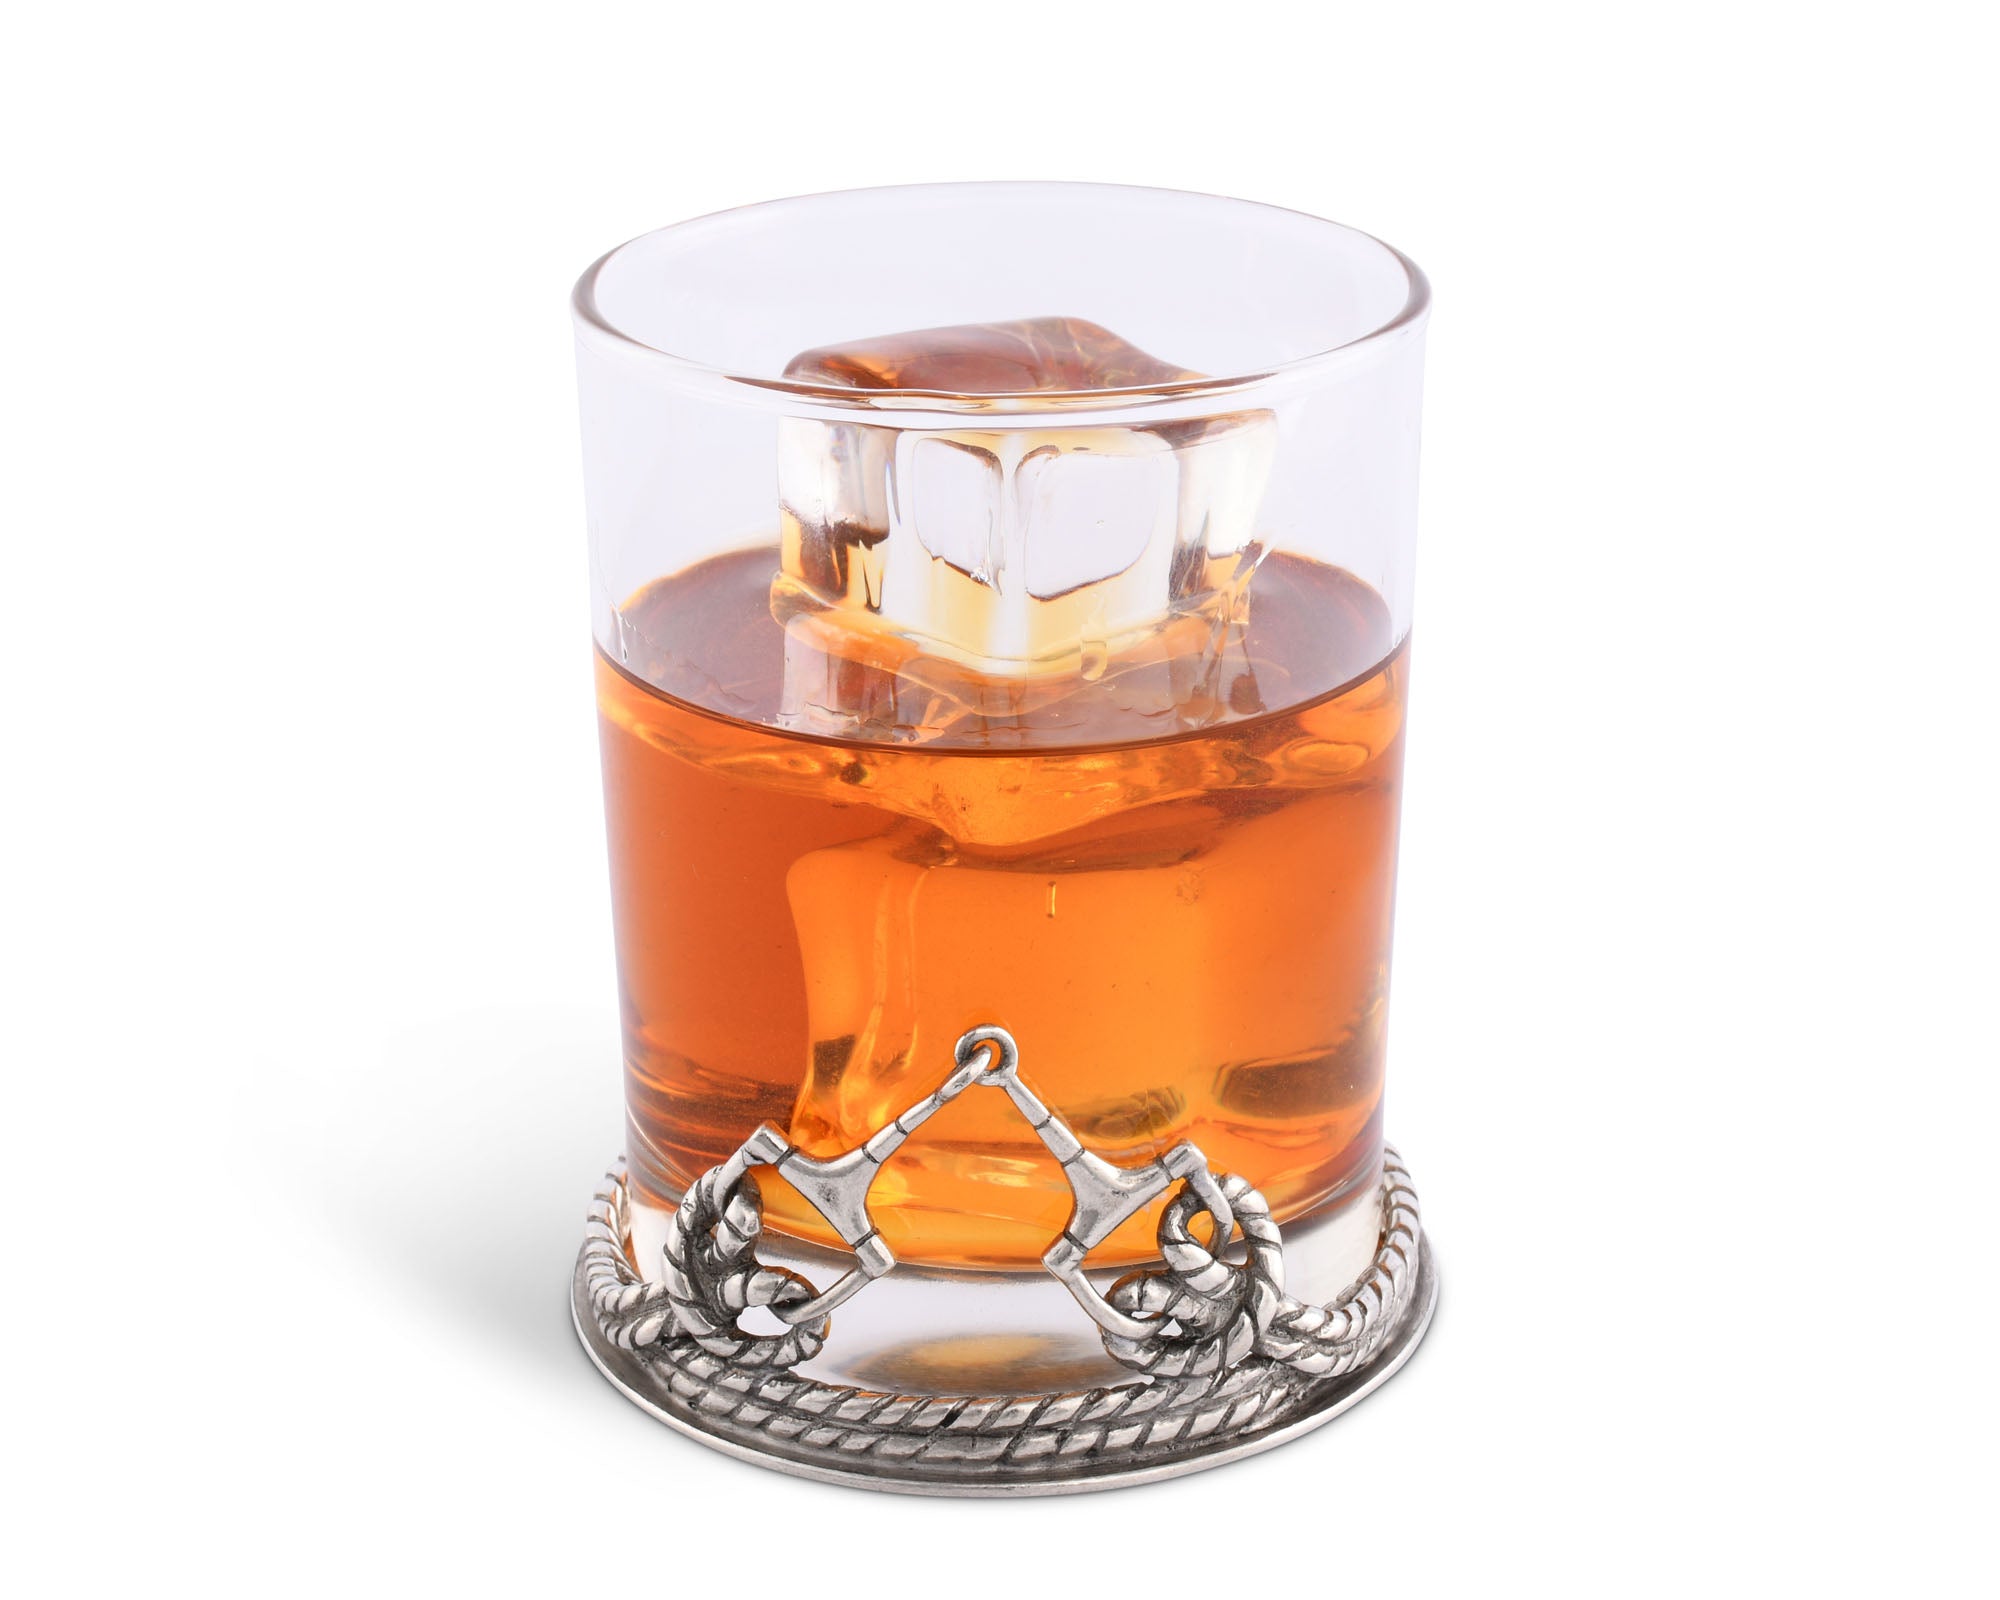 Vagabond House Equestraian D-Ring Snaffle Horse Bit Old Fashion Bar Glass Product Image